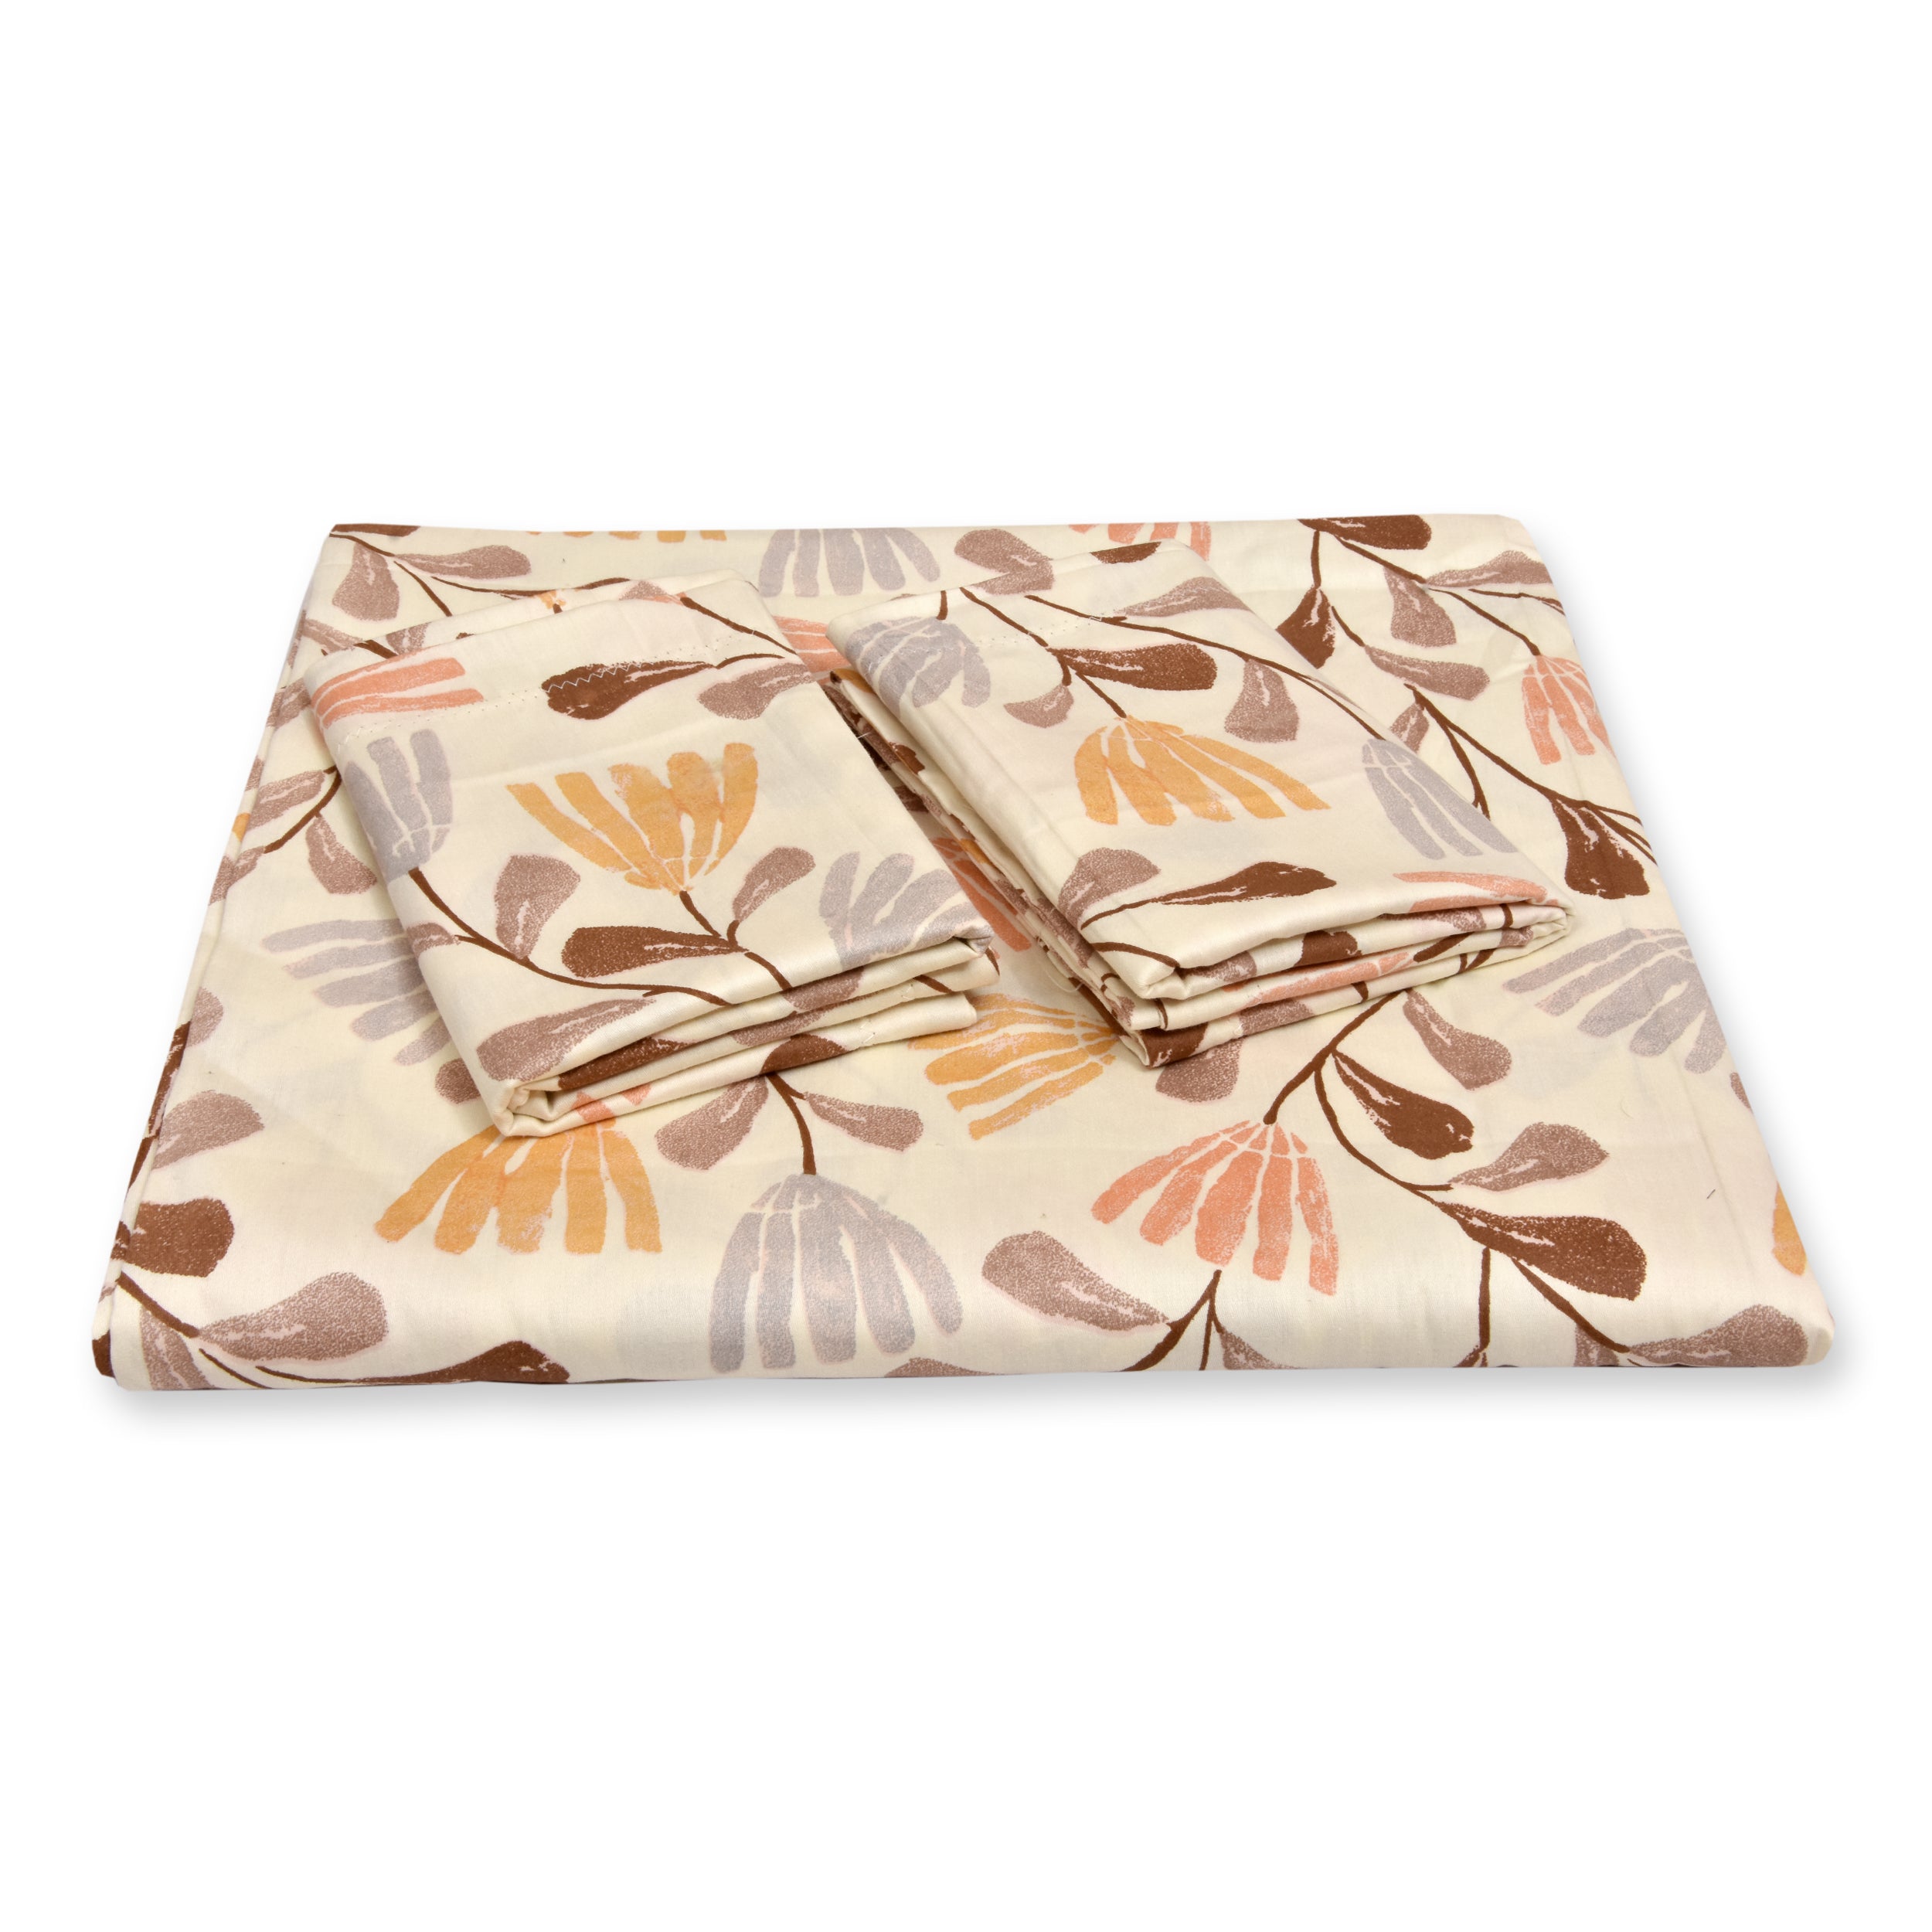 250 TC Pure Cotton Floral Print Premium Double Bed Bedsheet (100 In x 108 In) with 2 pillow cover - Beige, Brown and Orange 3